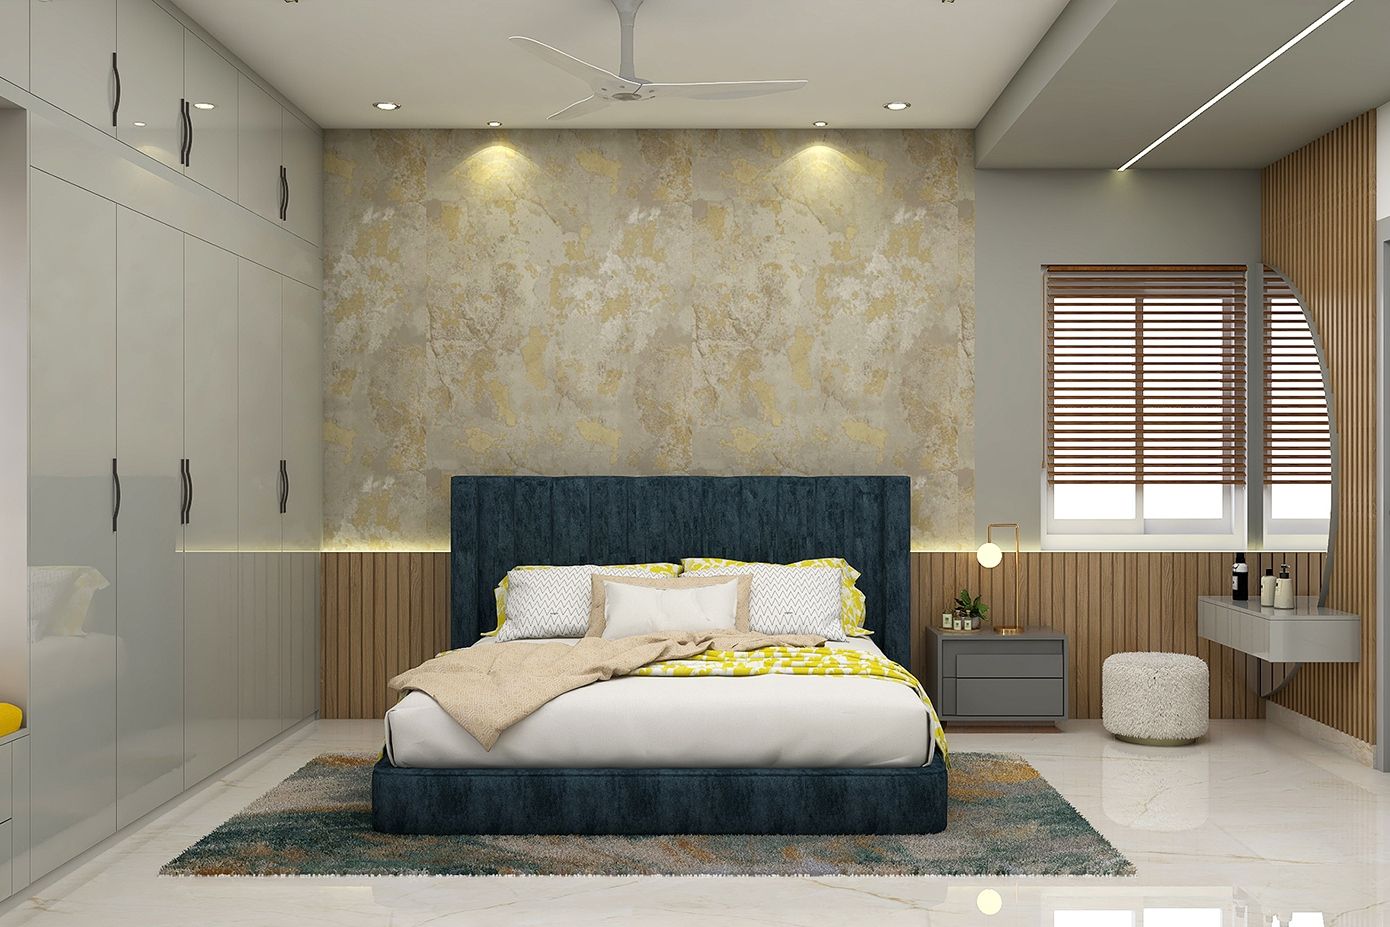 Contemporary Guest Room Design With Gold And Grey Accent Wall